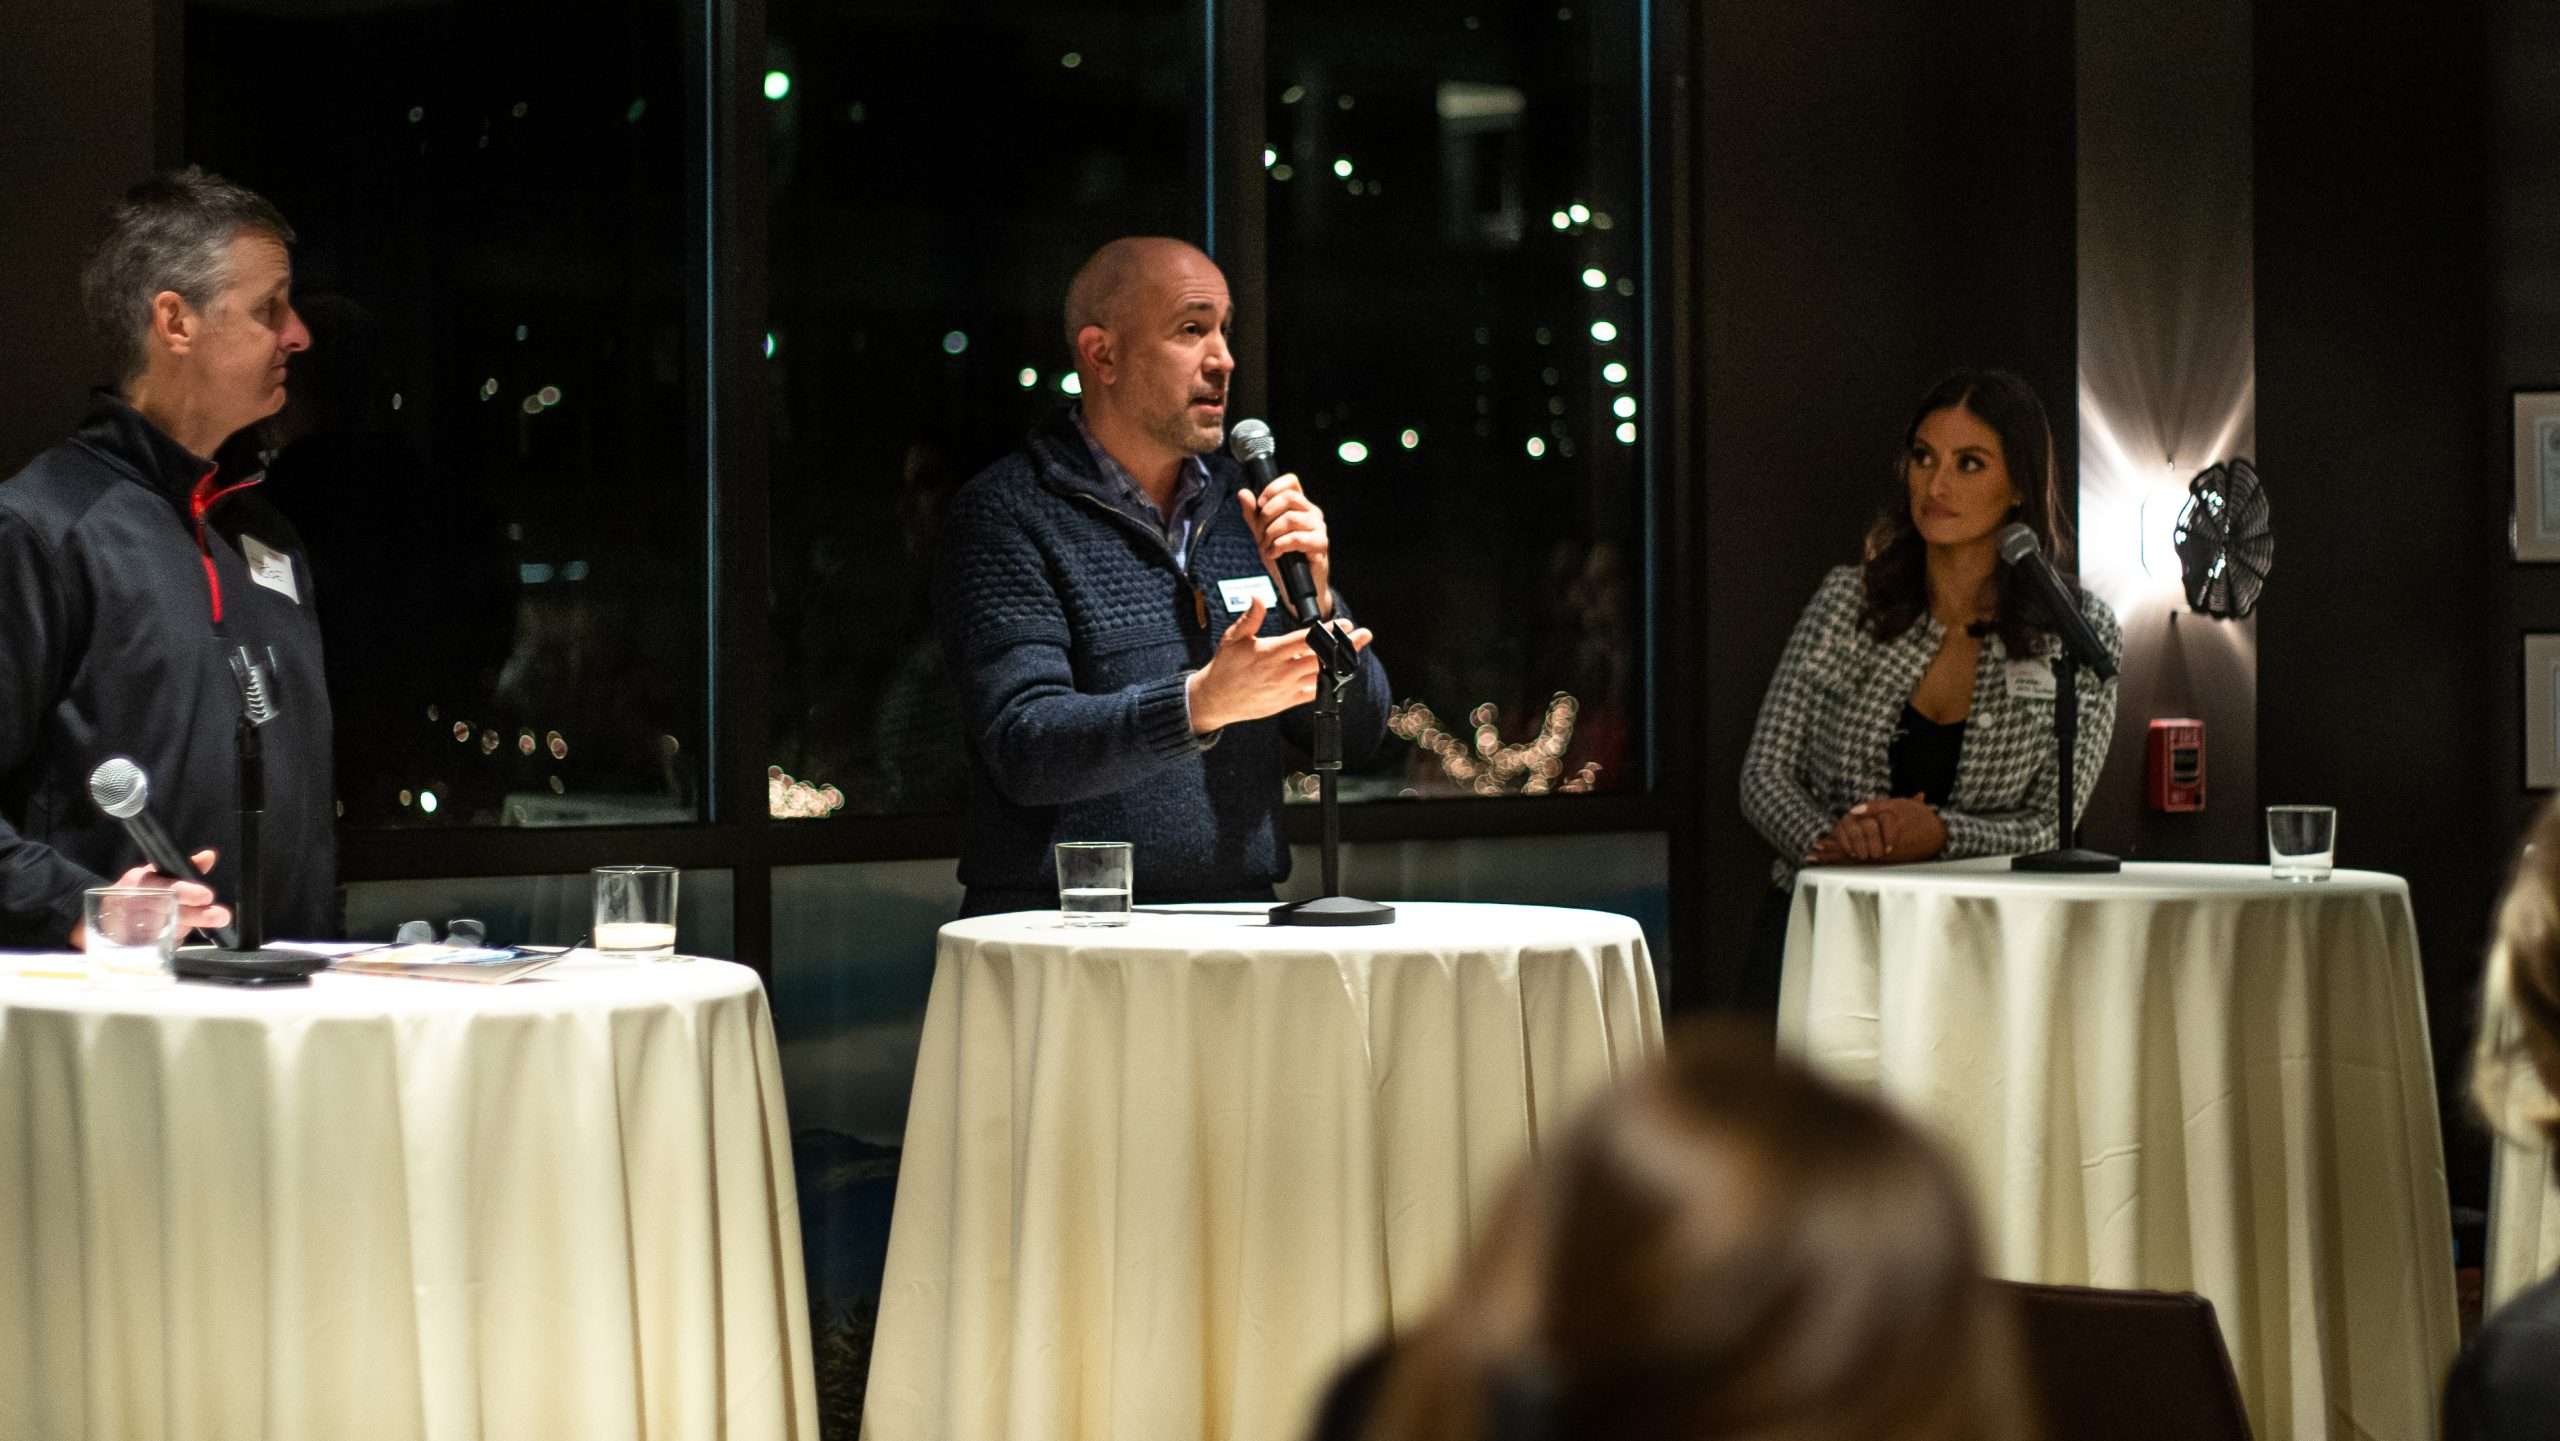 Members of the Hoeppner family, Steven Berbeco from the Mental Health Initiative, and Alexina Federhen Miss Vermont 2022 on a panel at Hotel Vermont on the evening of January 9th.